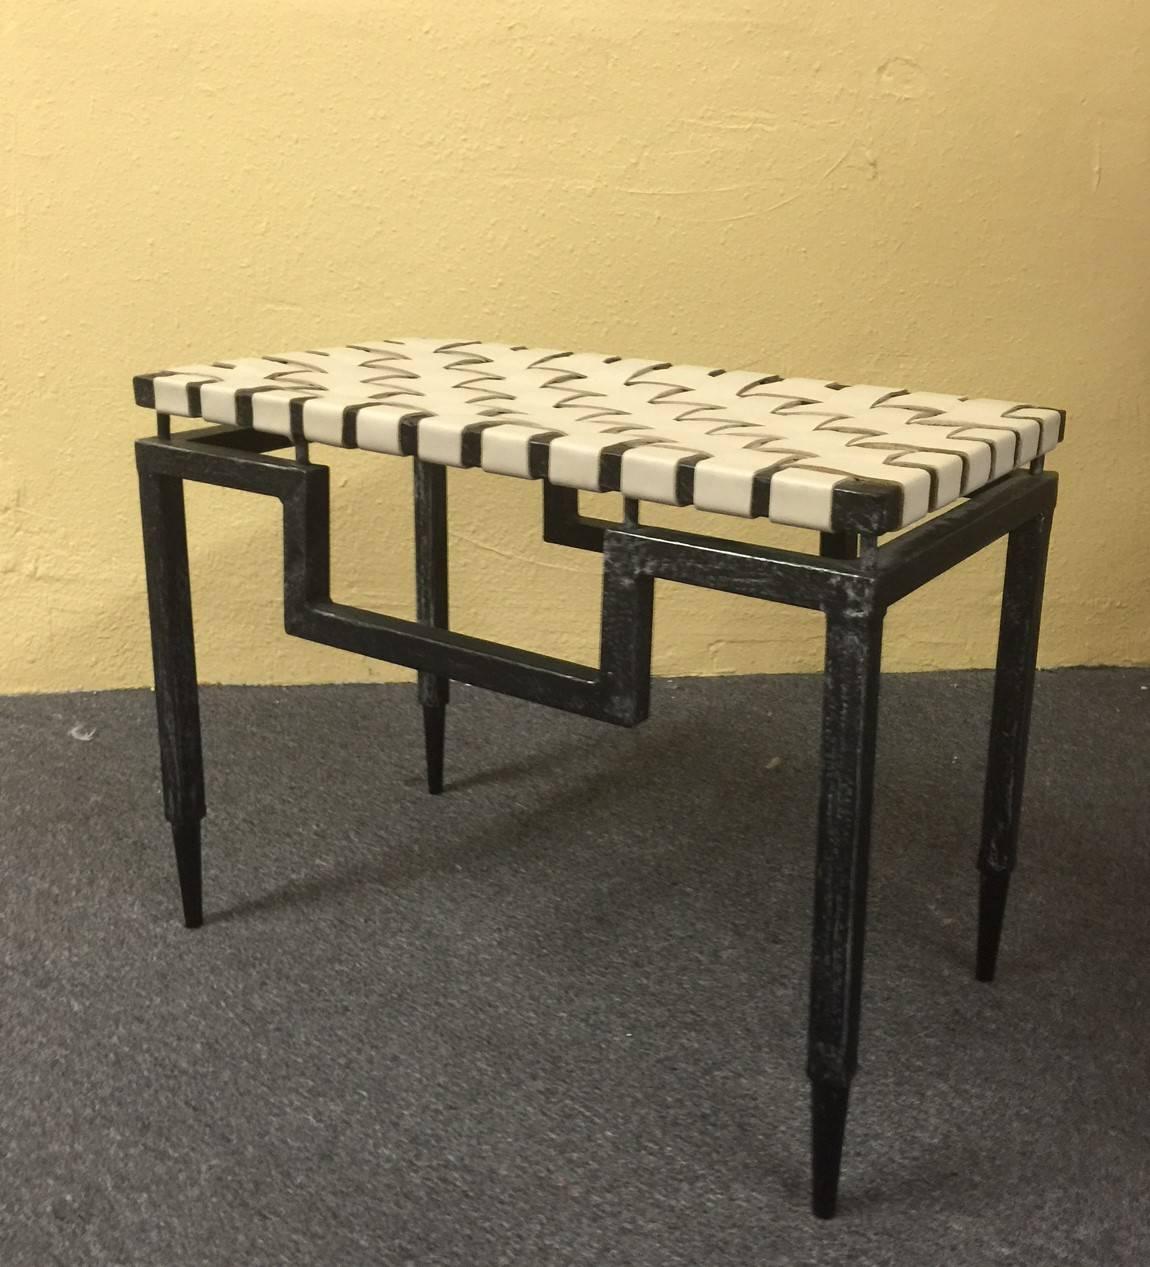 A striking pair of American modern stools made of hammered steel with white leather weaved seats. Solid, heavy and functional, great addition to any room.